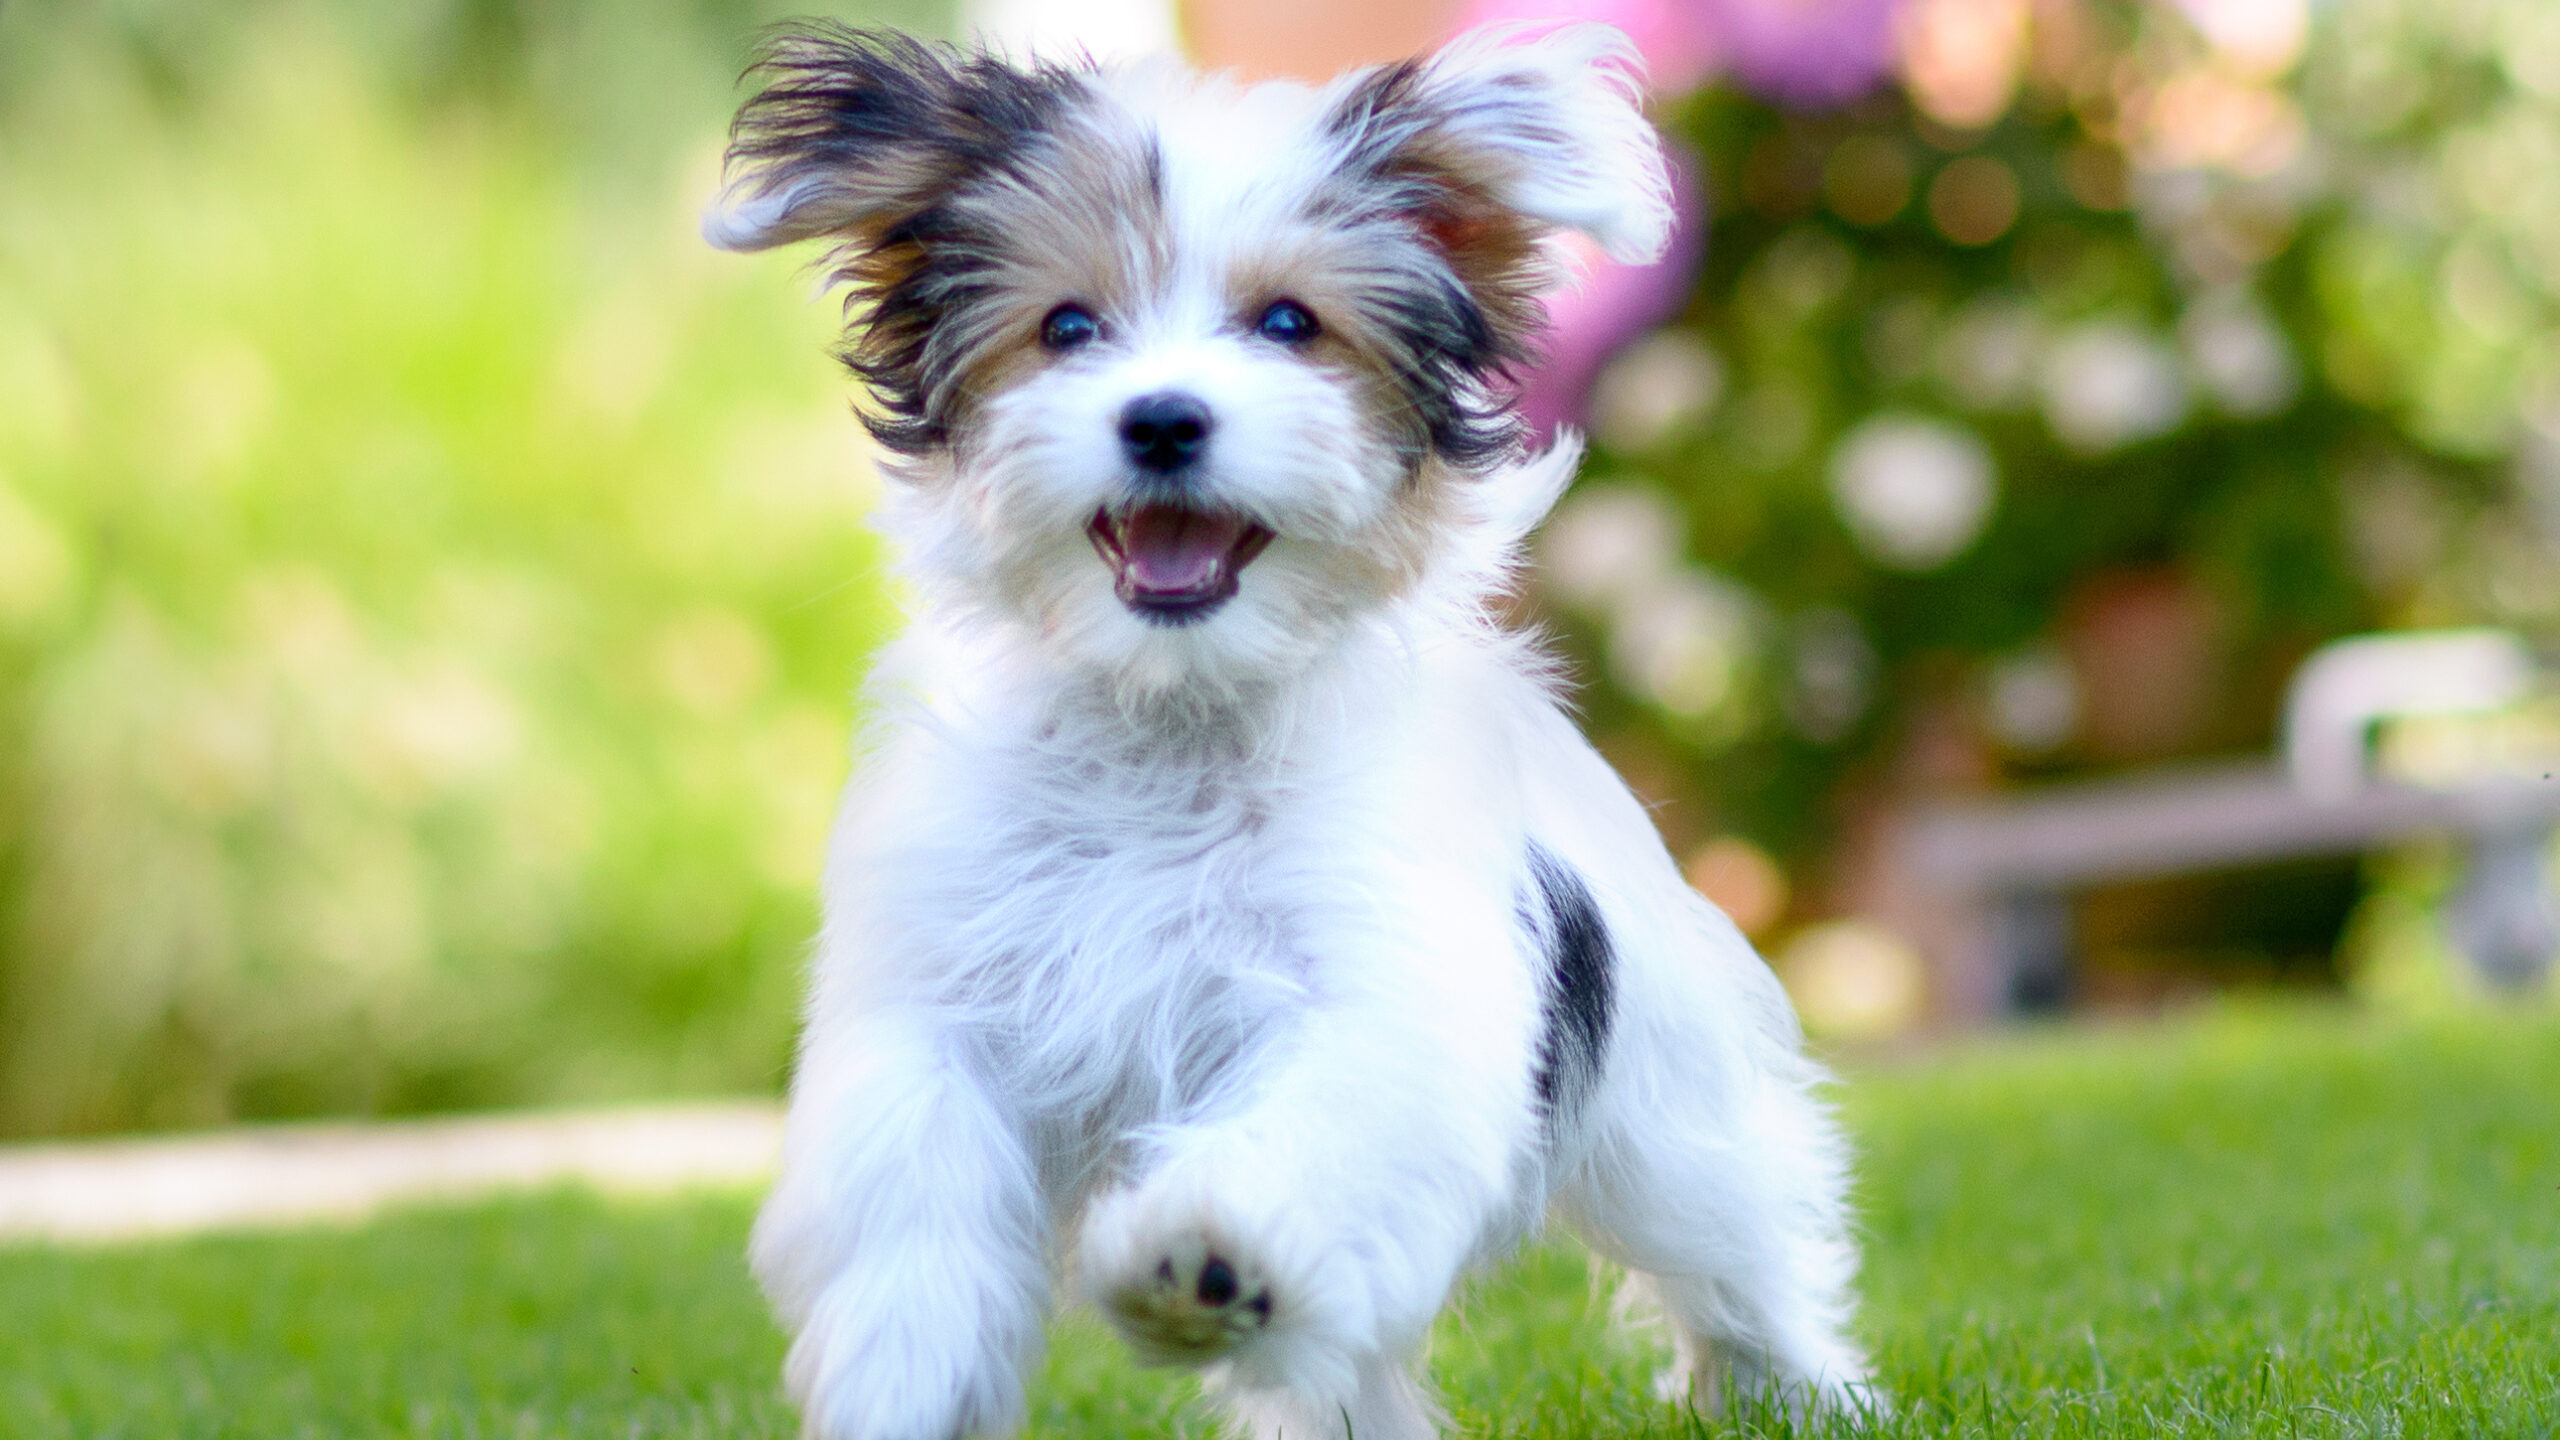 Important Tips to Keep Your Pets Safe this Spring | Veterinary Medicine News